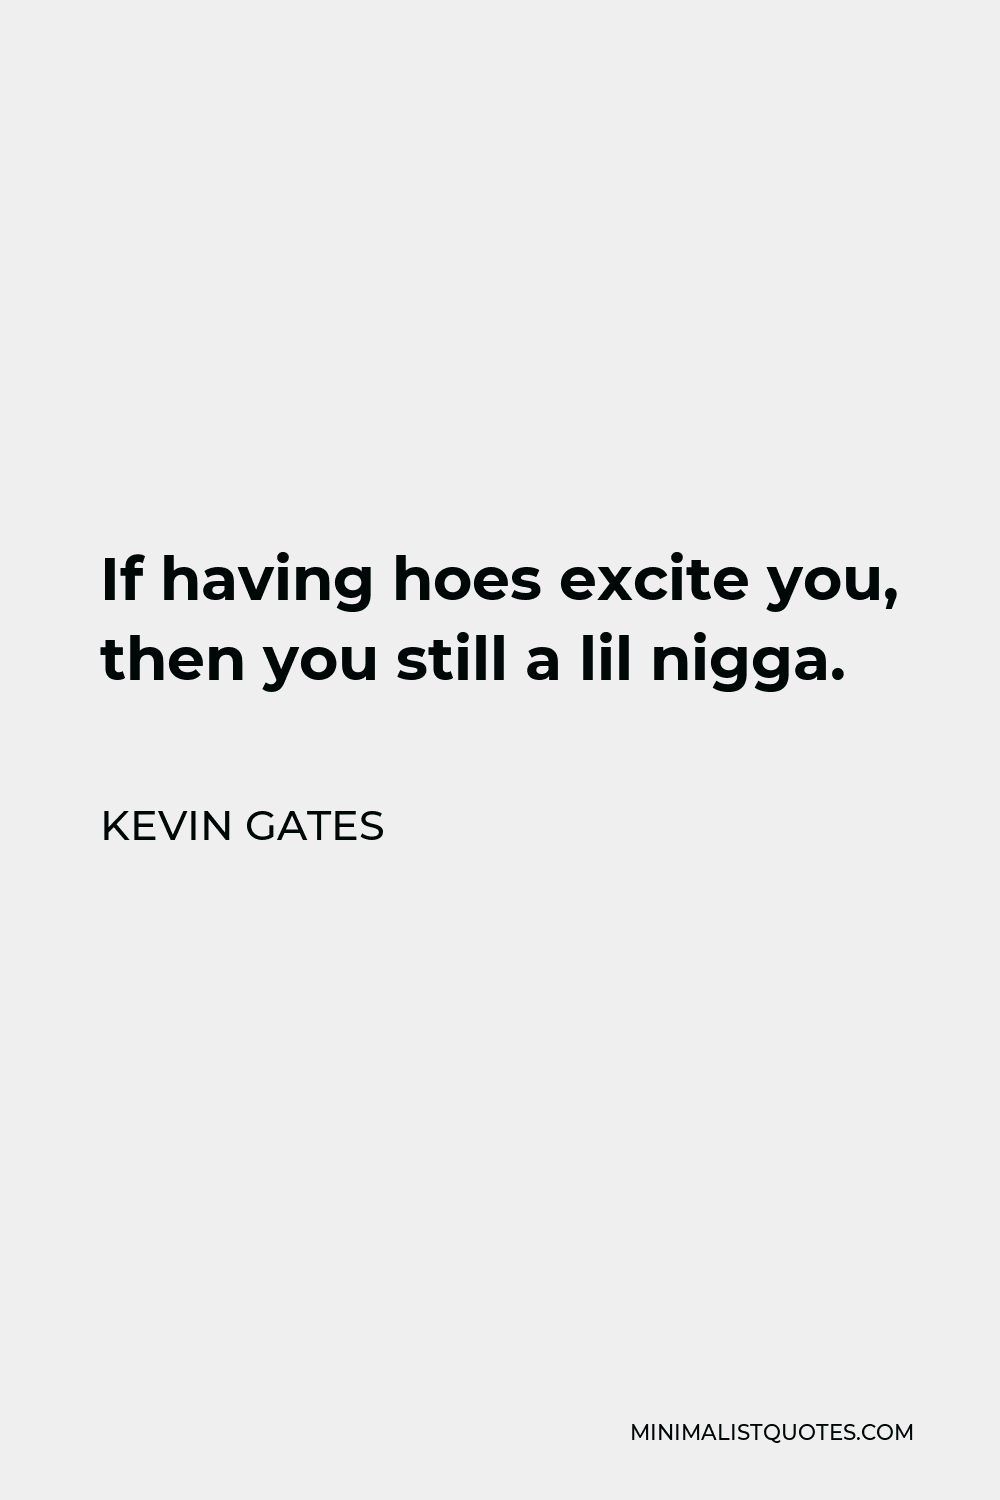 quotes about hoes being hoes